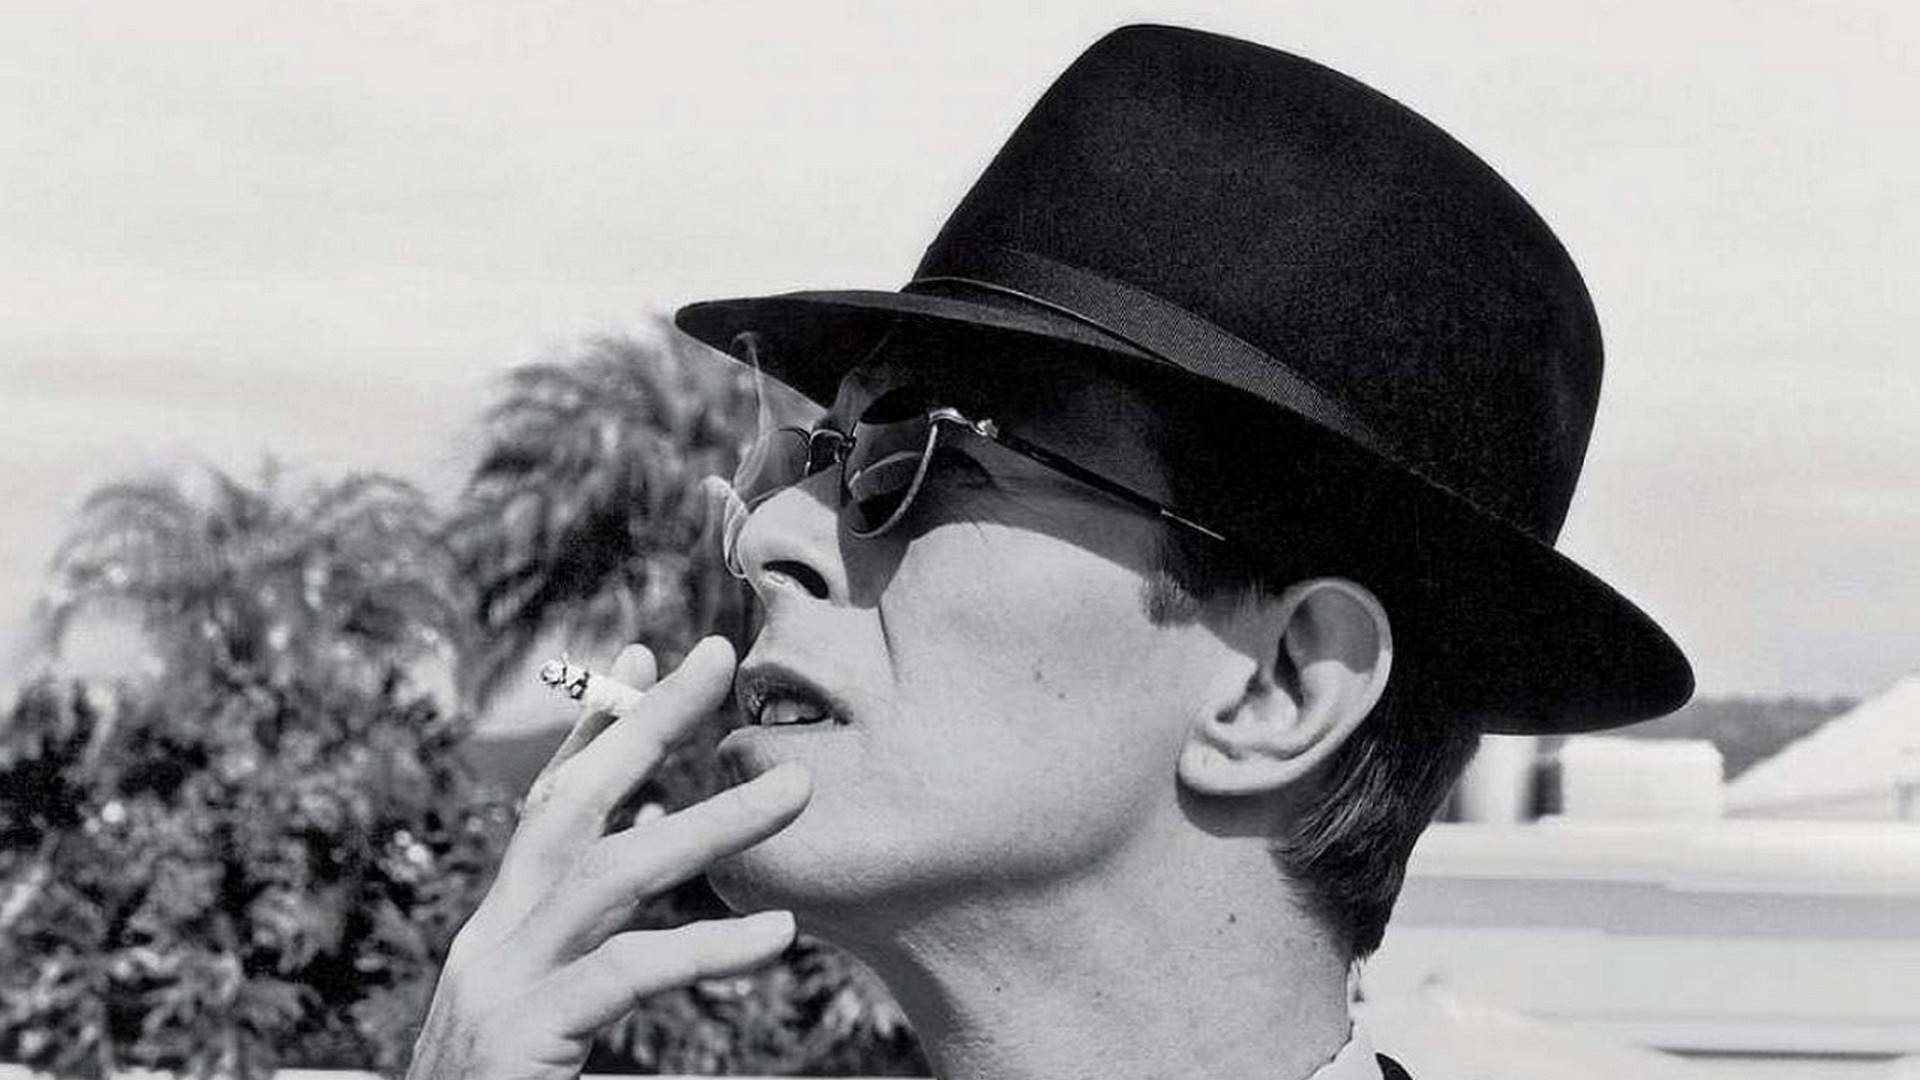 David Bowie With Hat And Sunglasses